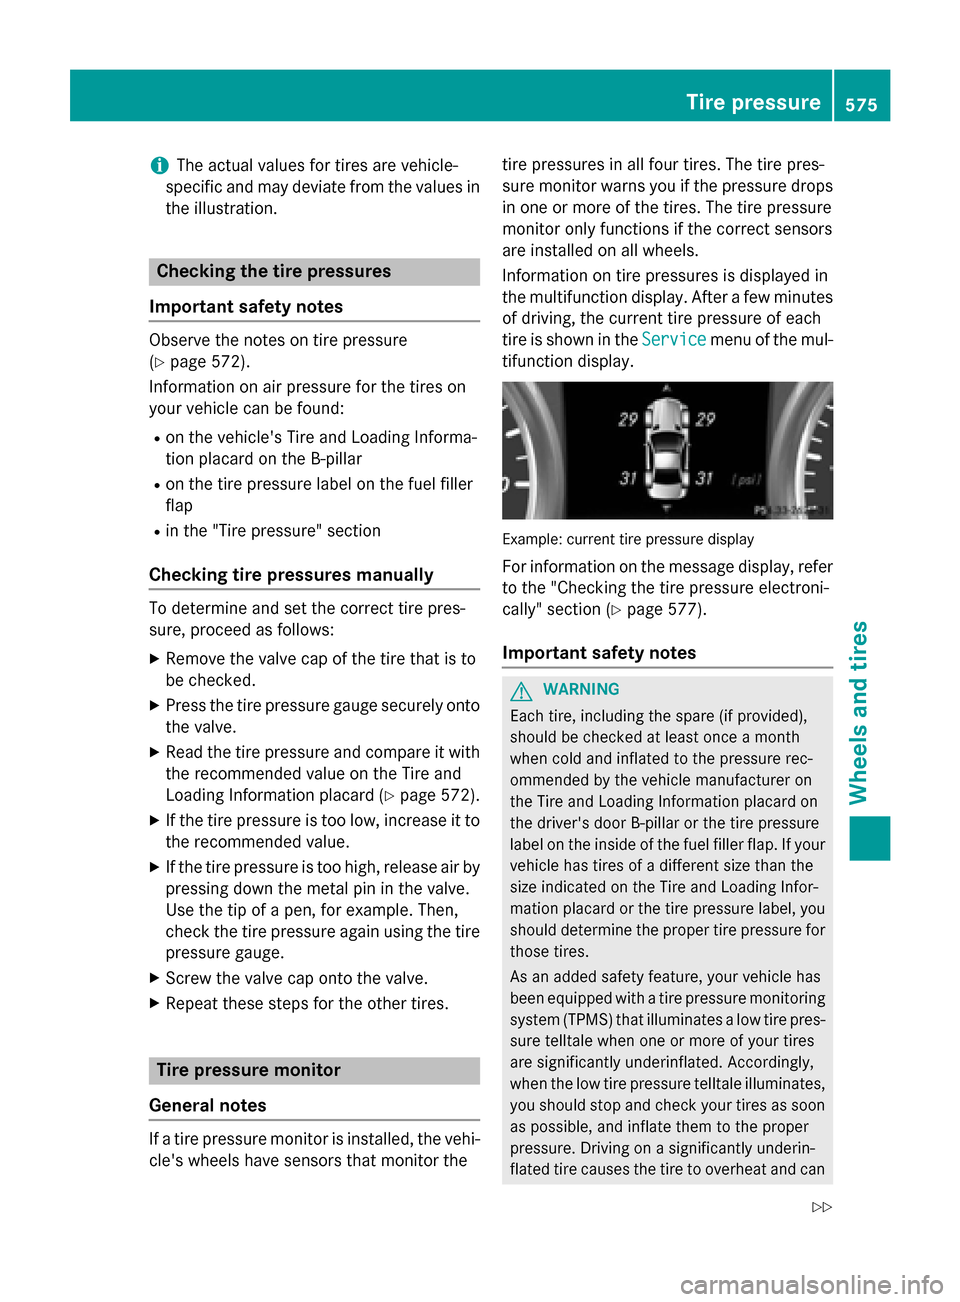 MERCEDES-BENZ SL-Class 2015 R131 Owners Manual i
The actual values for tires are vehicle-
specific and may deviate from the values in
the illustration. Checking the tire pressures
Important safety notes Observe the notes on tire pressure
(Y
page 5